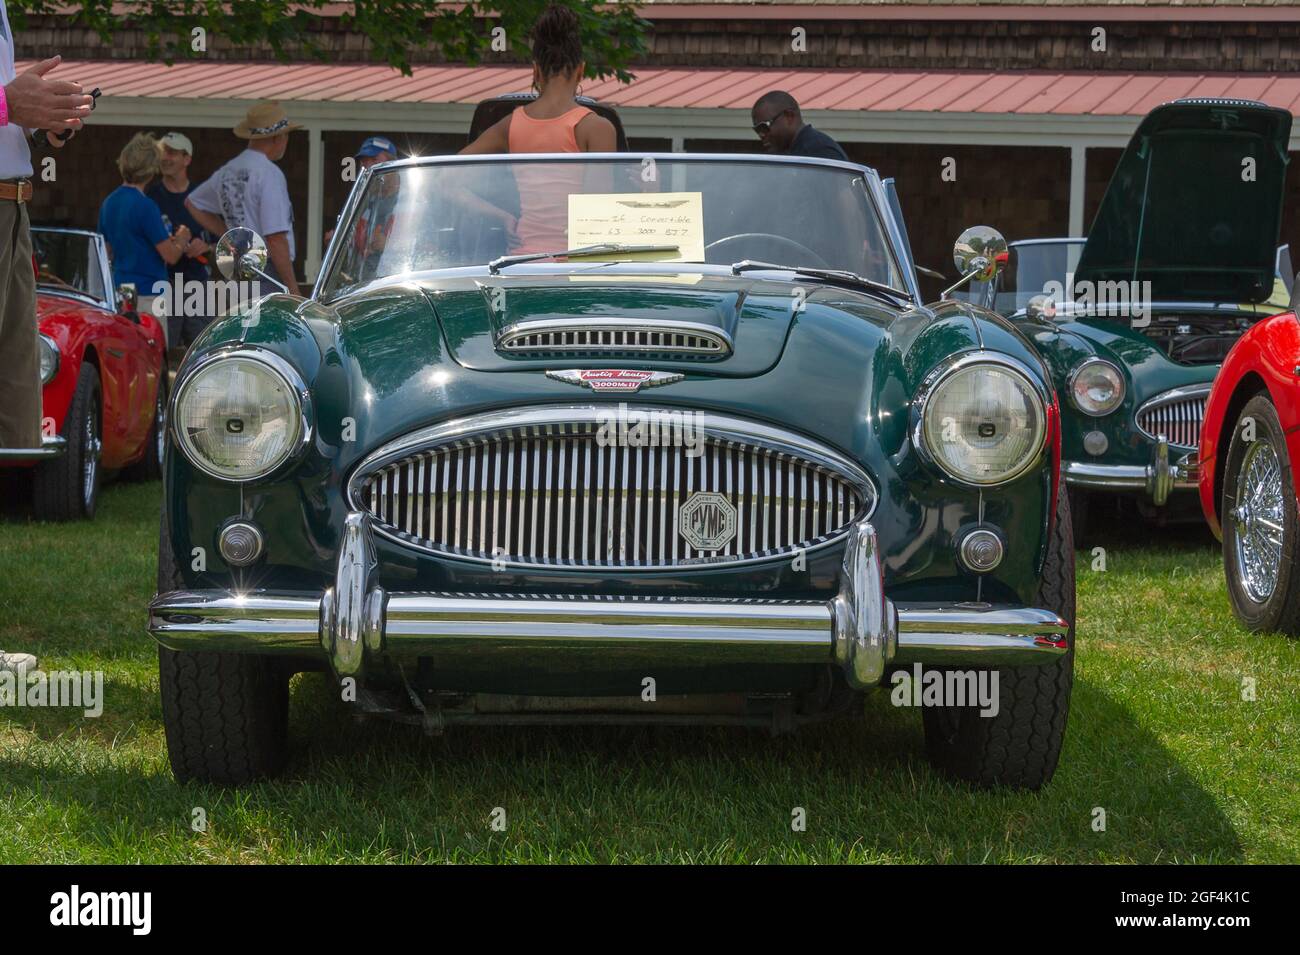 Mystic, CT USA / July 23, 2011: Classic green1963 Austin Healey 3000 Mk II sports car on display at summer British Car Show in New England. Stock Photo